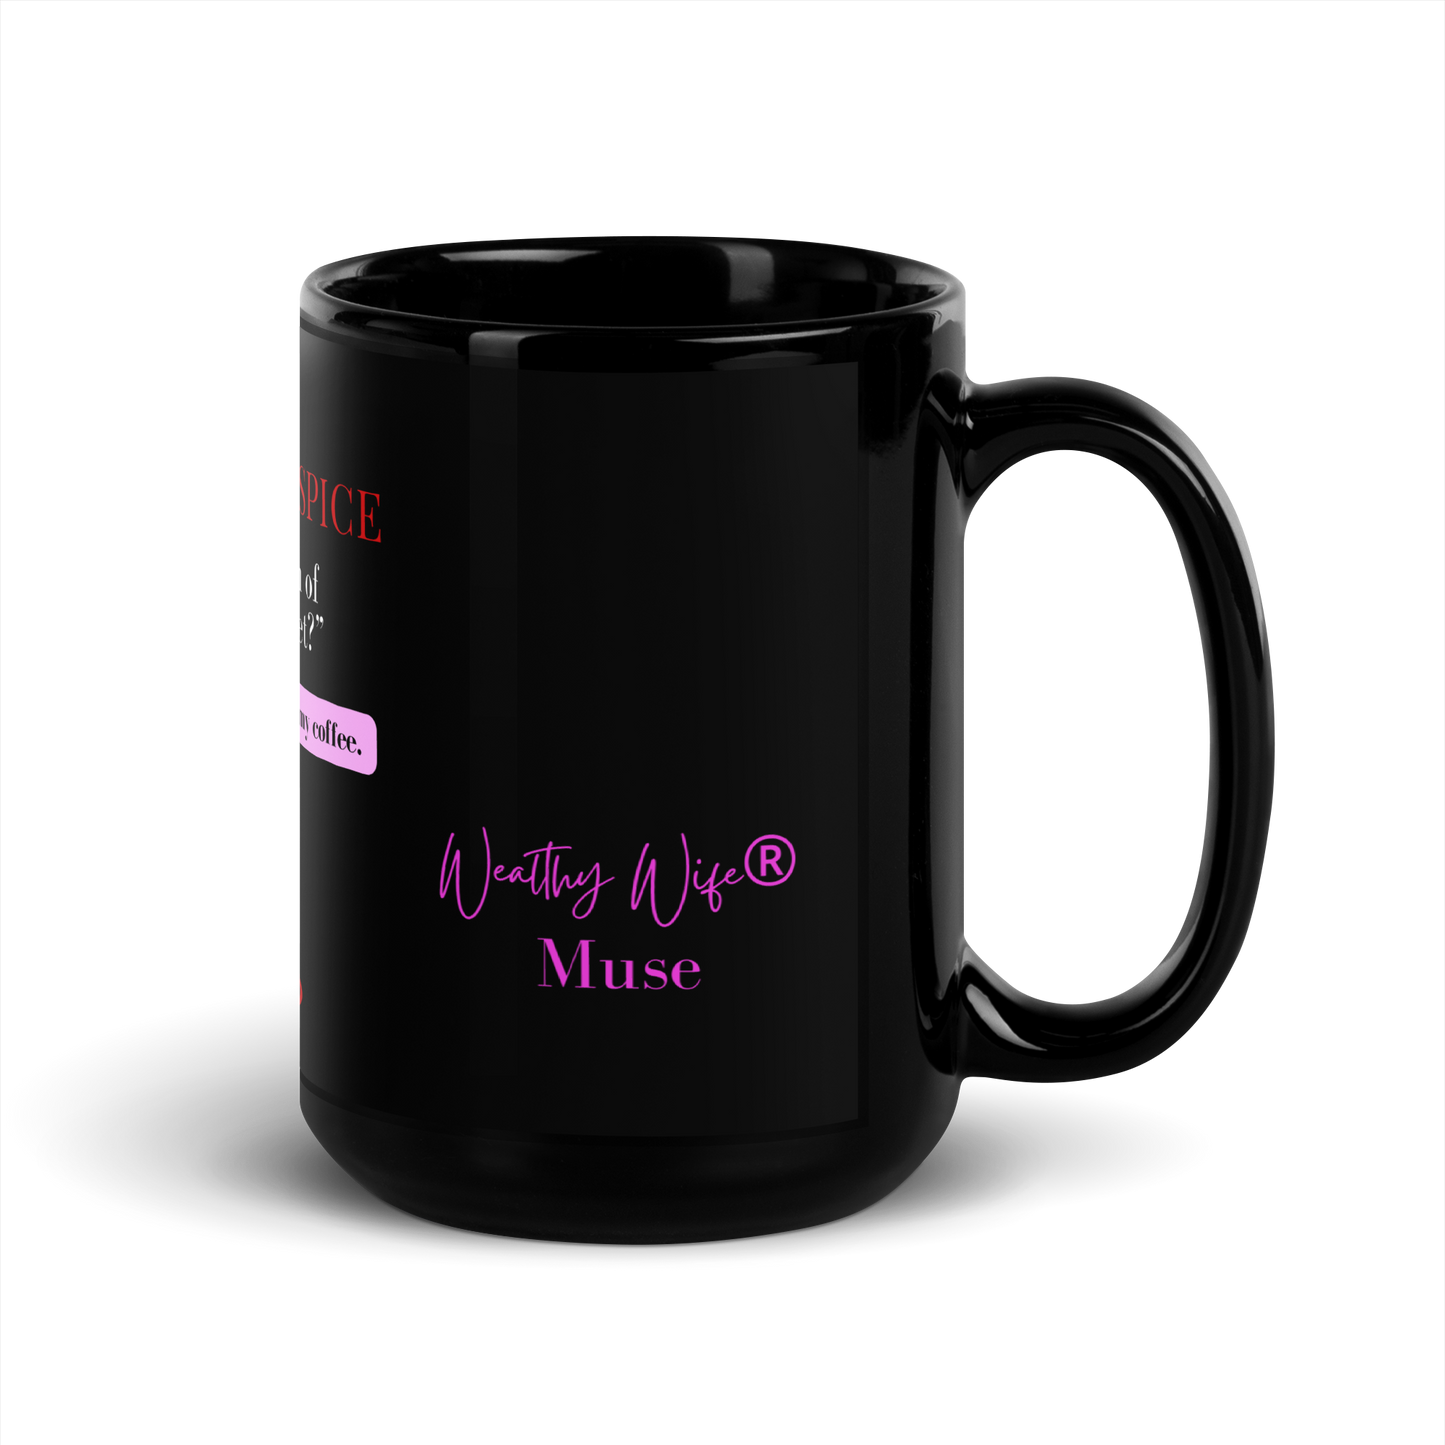 Wealthy Wife®’s Quote/Statement Black Glossy Mug